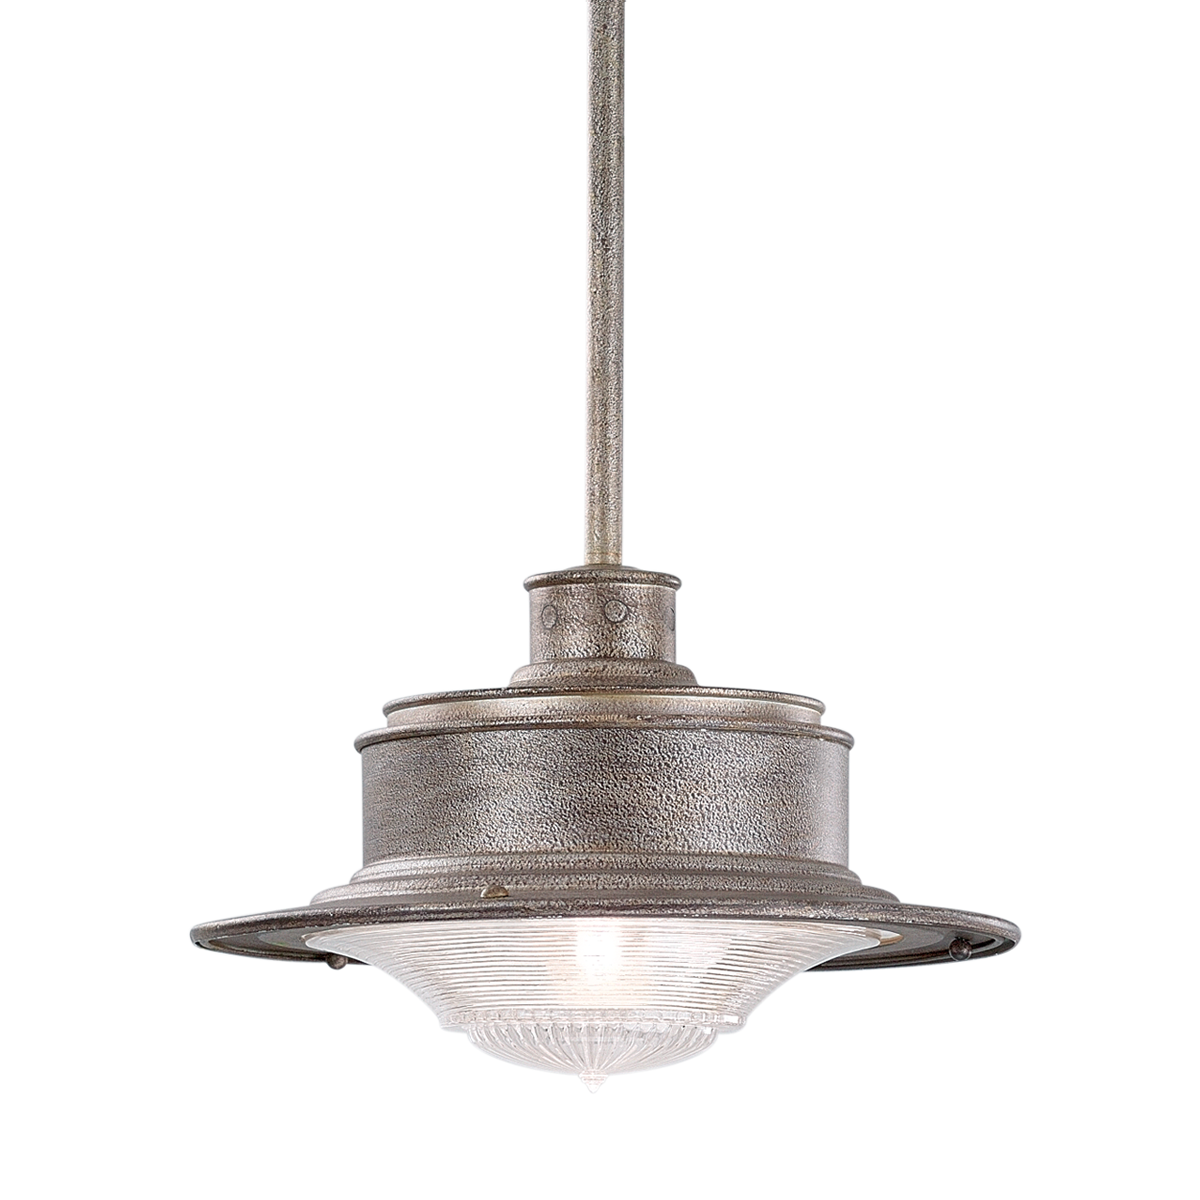 Troy Lighting SOUTH STREET 1LT HANGING DOWNLIGHT SMALL OLD GALVANIZED F9395 Outdoor Light Fixture l Hanging Troy Lighting OLD GALVANIZED  